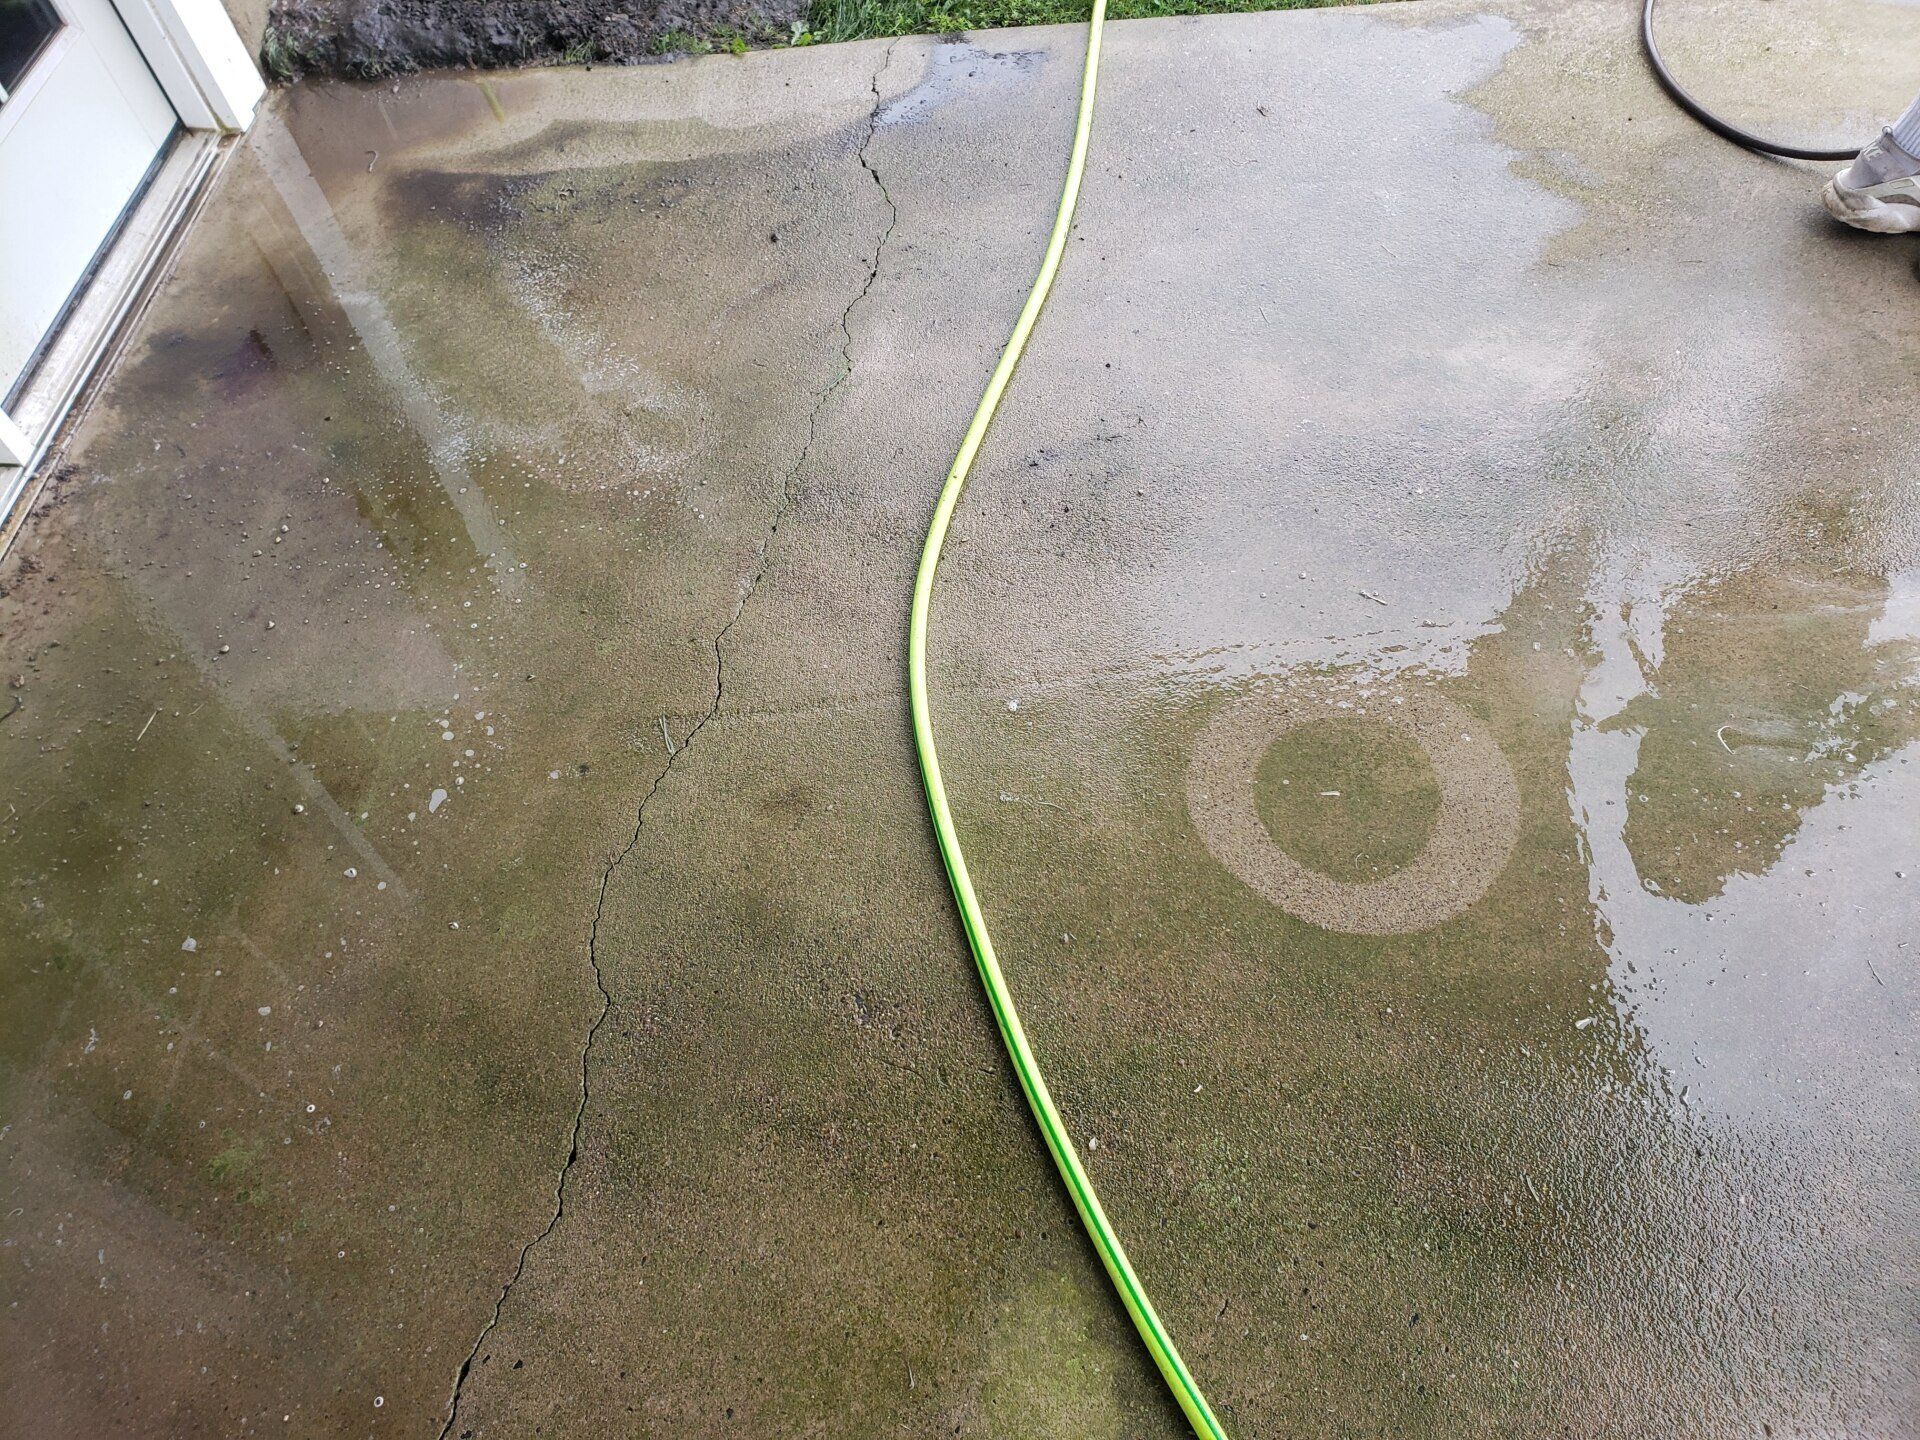 A green hose is being used to clean a concrete floor